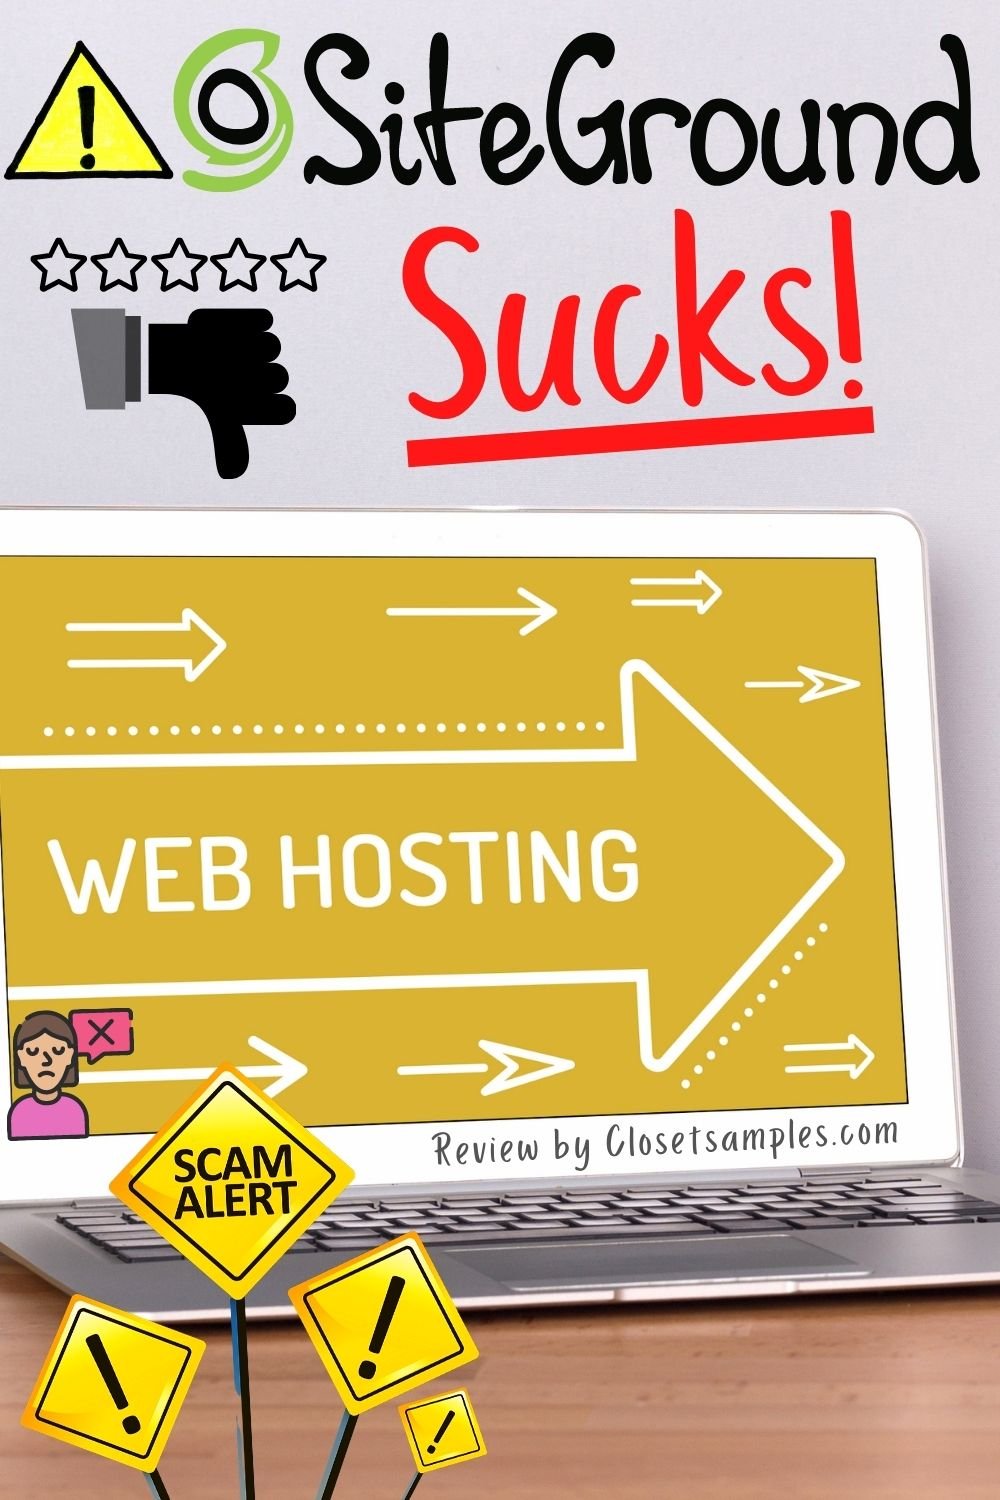 Siteground Web Hosting Review Reasons to AVOID them scam closetsamples Pinterest